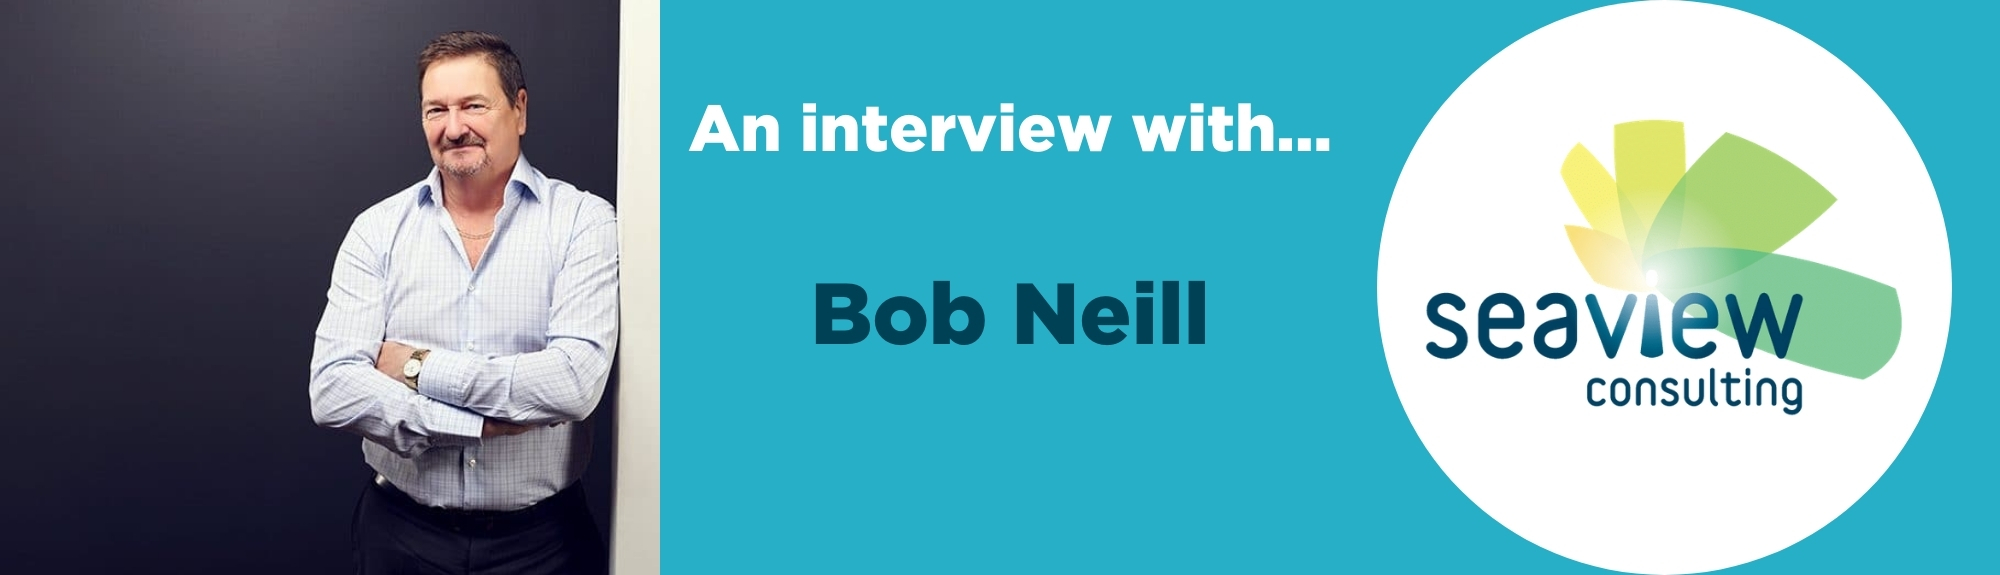 An interview with Bob Neill, Seaview Consulting